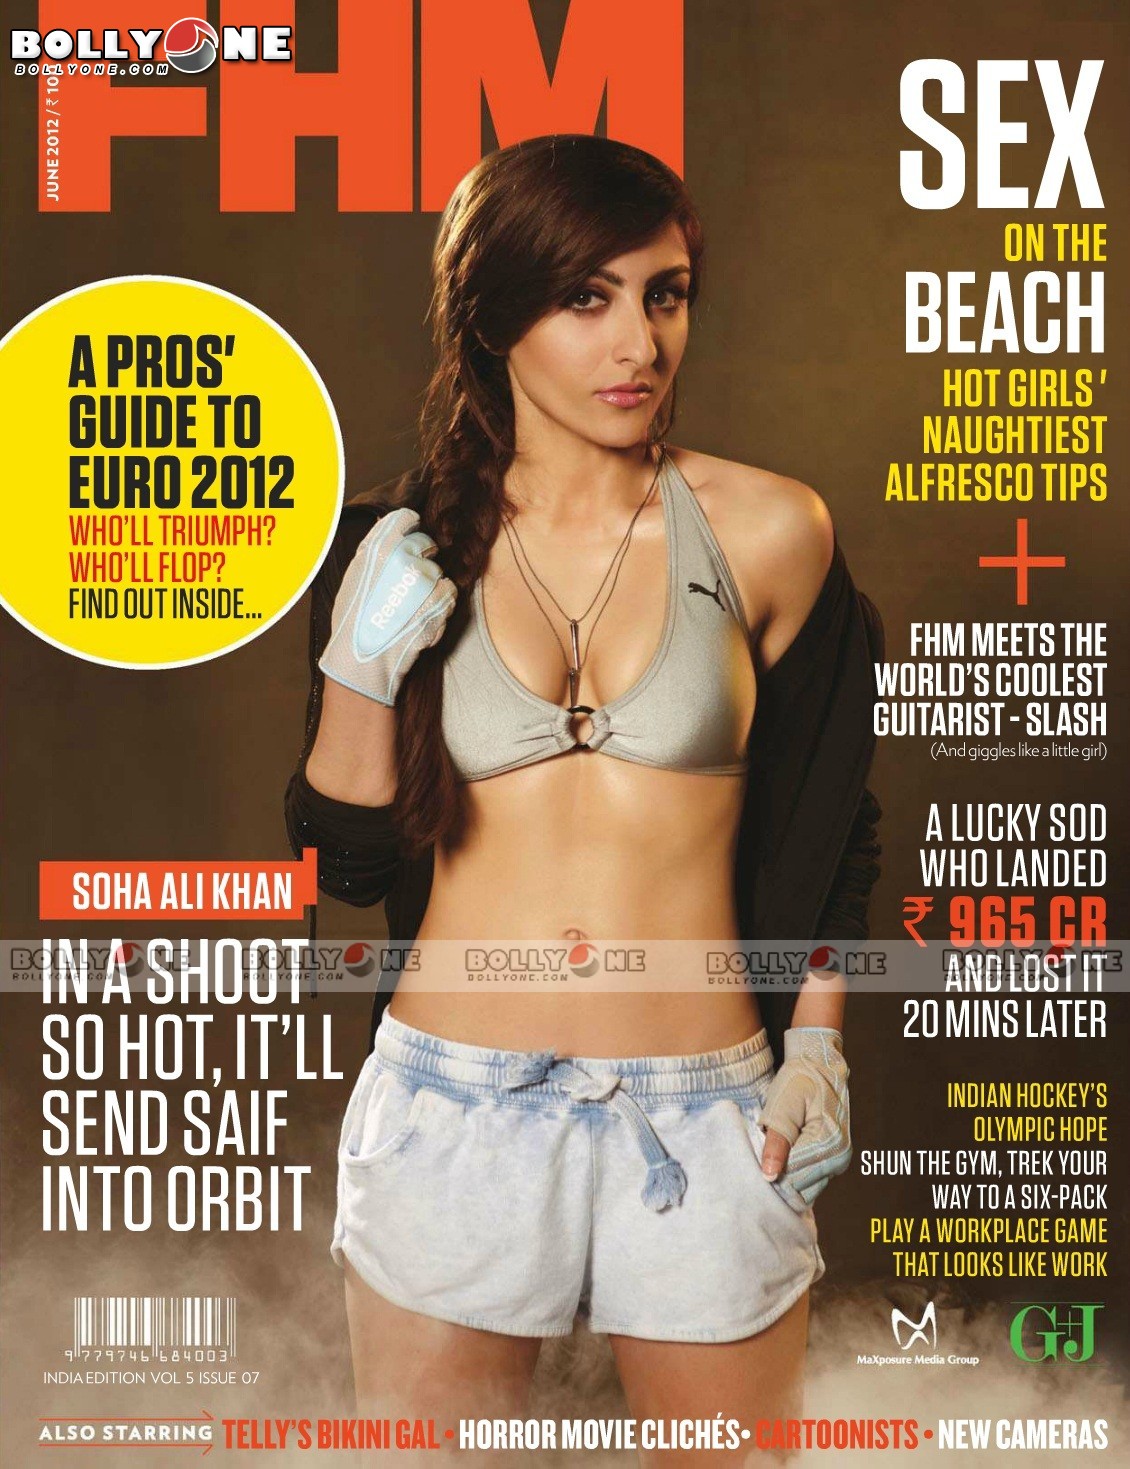 Soha ali khan showing navel in workout gear - Bollywood babes MAGAZINE COVERS- who strikes your fancy? 